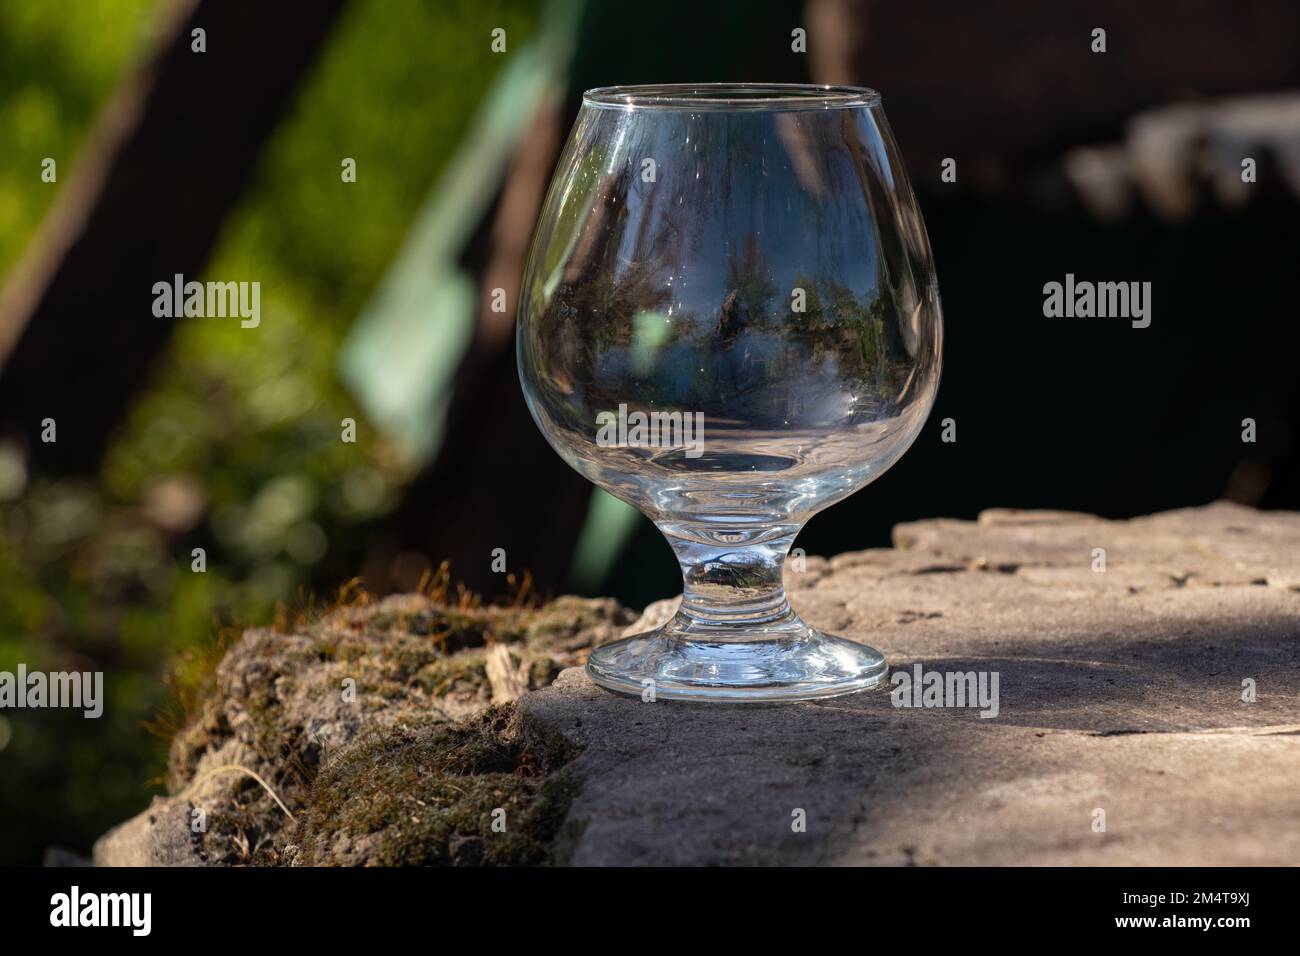 https://c8.alamy.com/comp/2M4T9XJ/an-empty-transparent-glass-goblet-stands-on-the-ground-2M4T9XJ.jpg